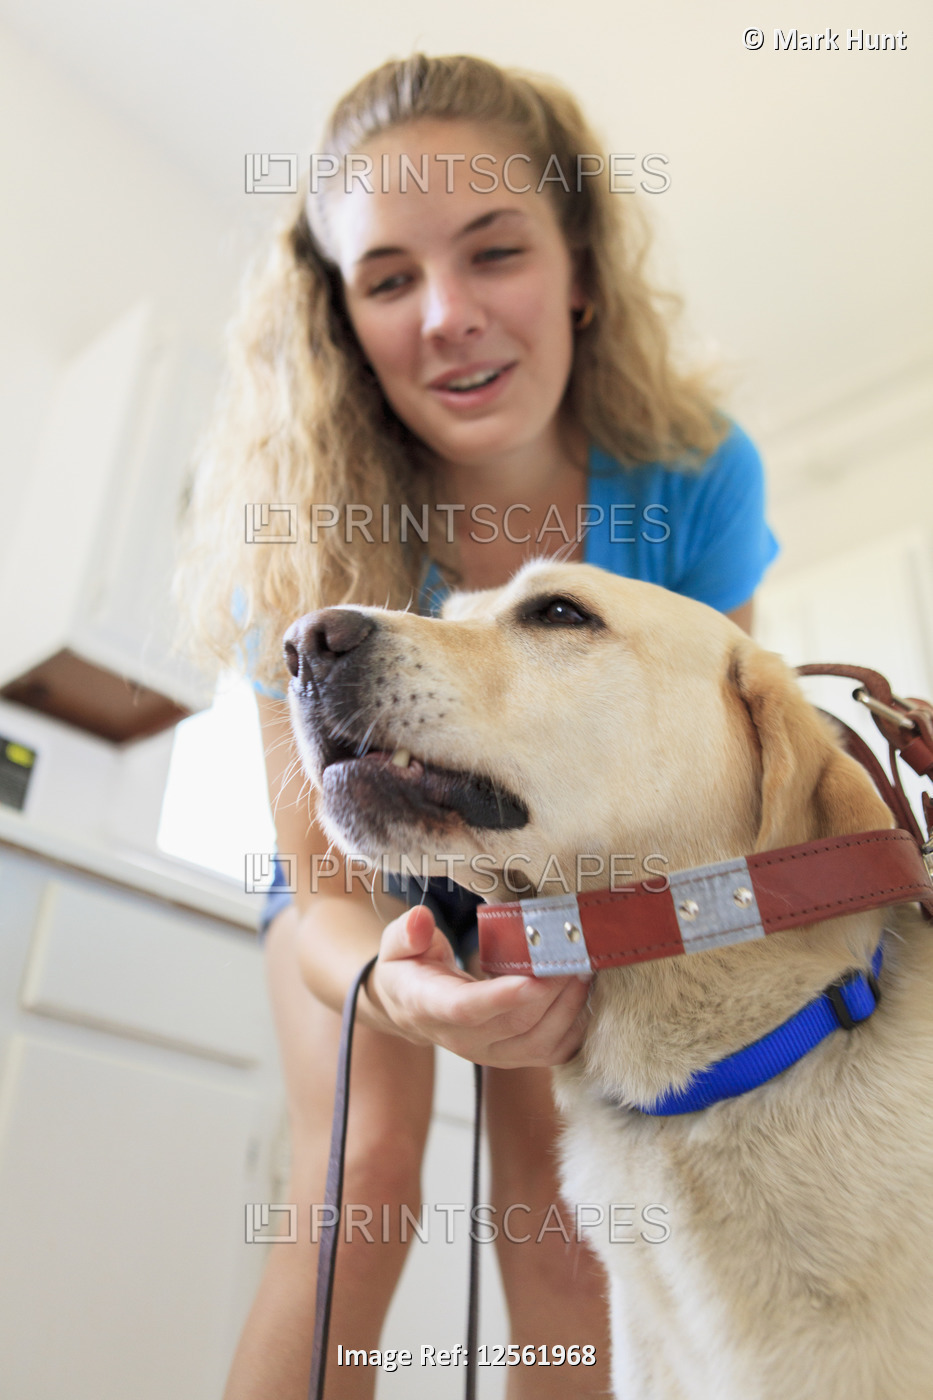 Woman with visual impairment putting the belt on her service dog